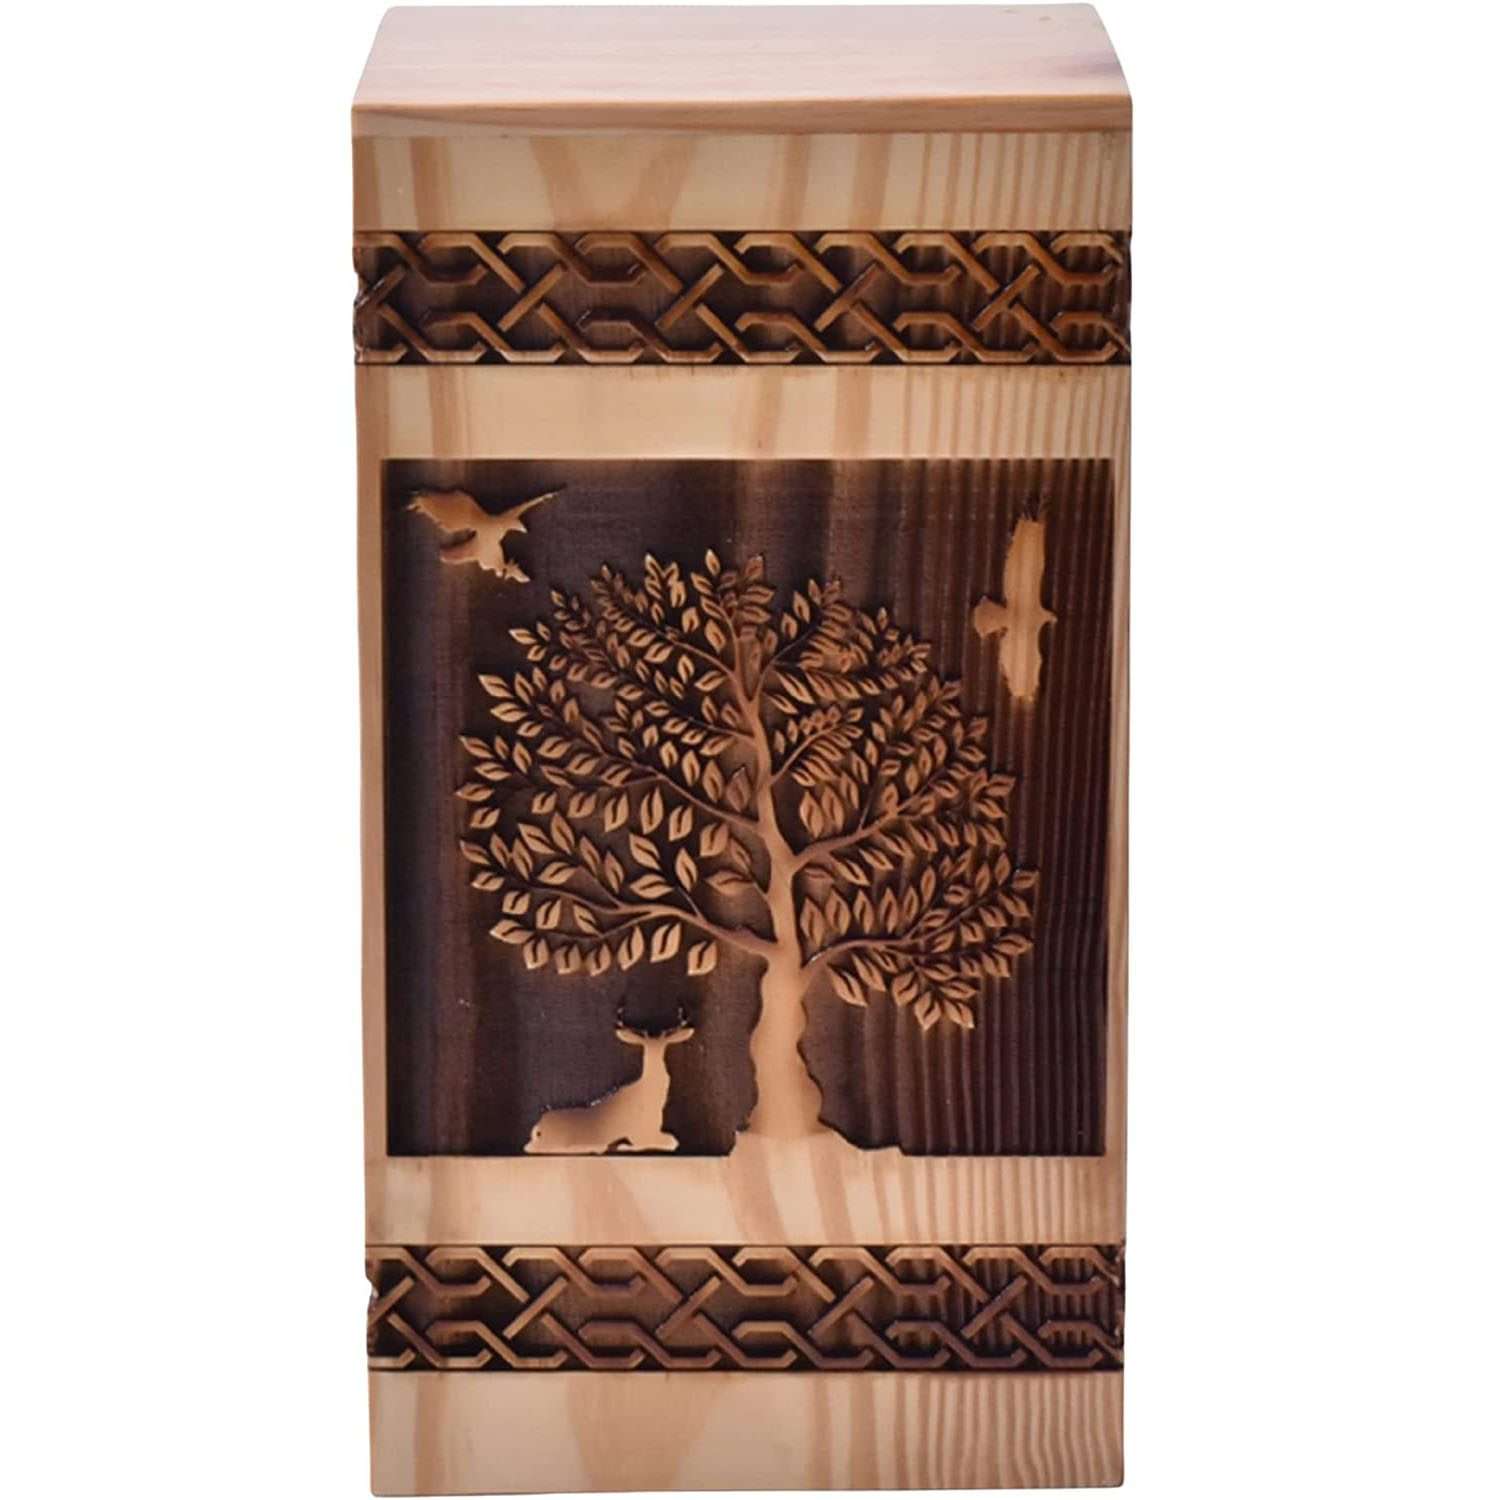 Handcrafted Rosewood Keepsake Urn Box for Ashes | Tree of life hand carved Cremation Urn’s